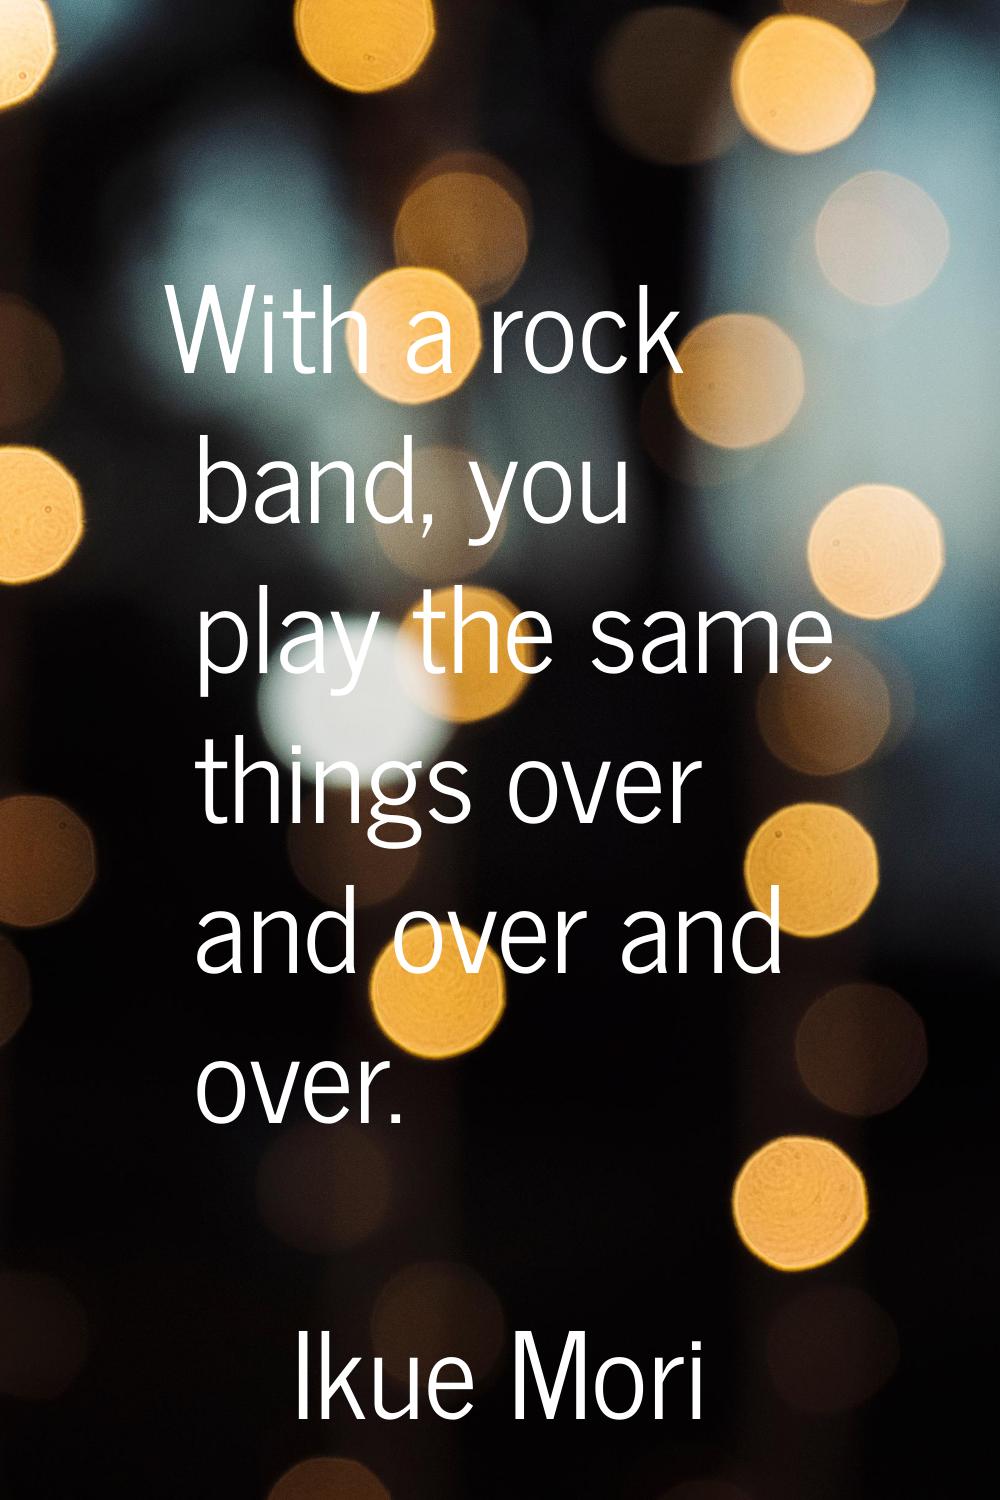 With a rock band, you play the same things over and over and over.